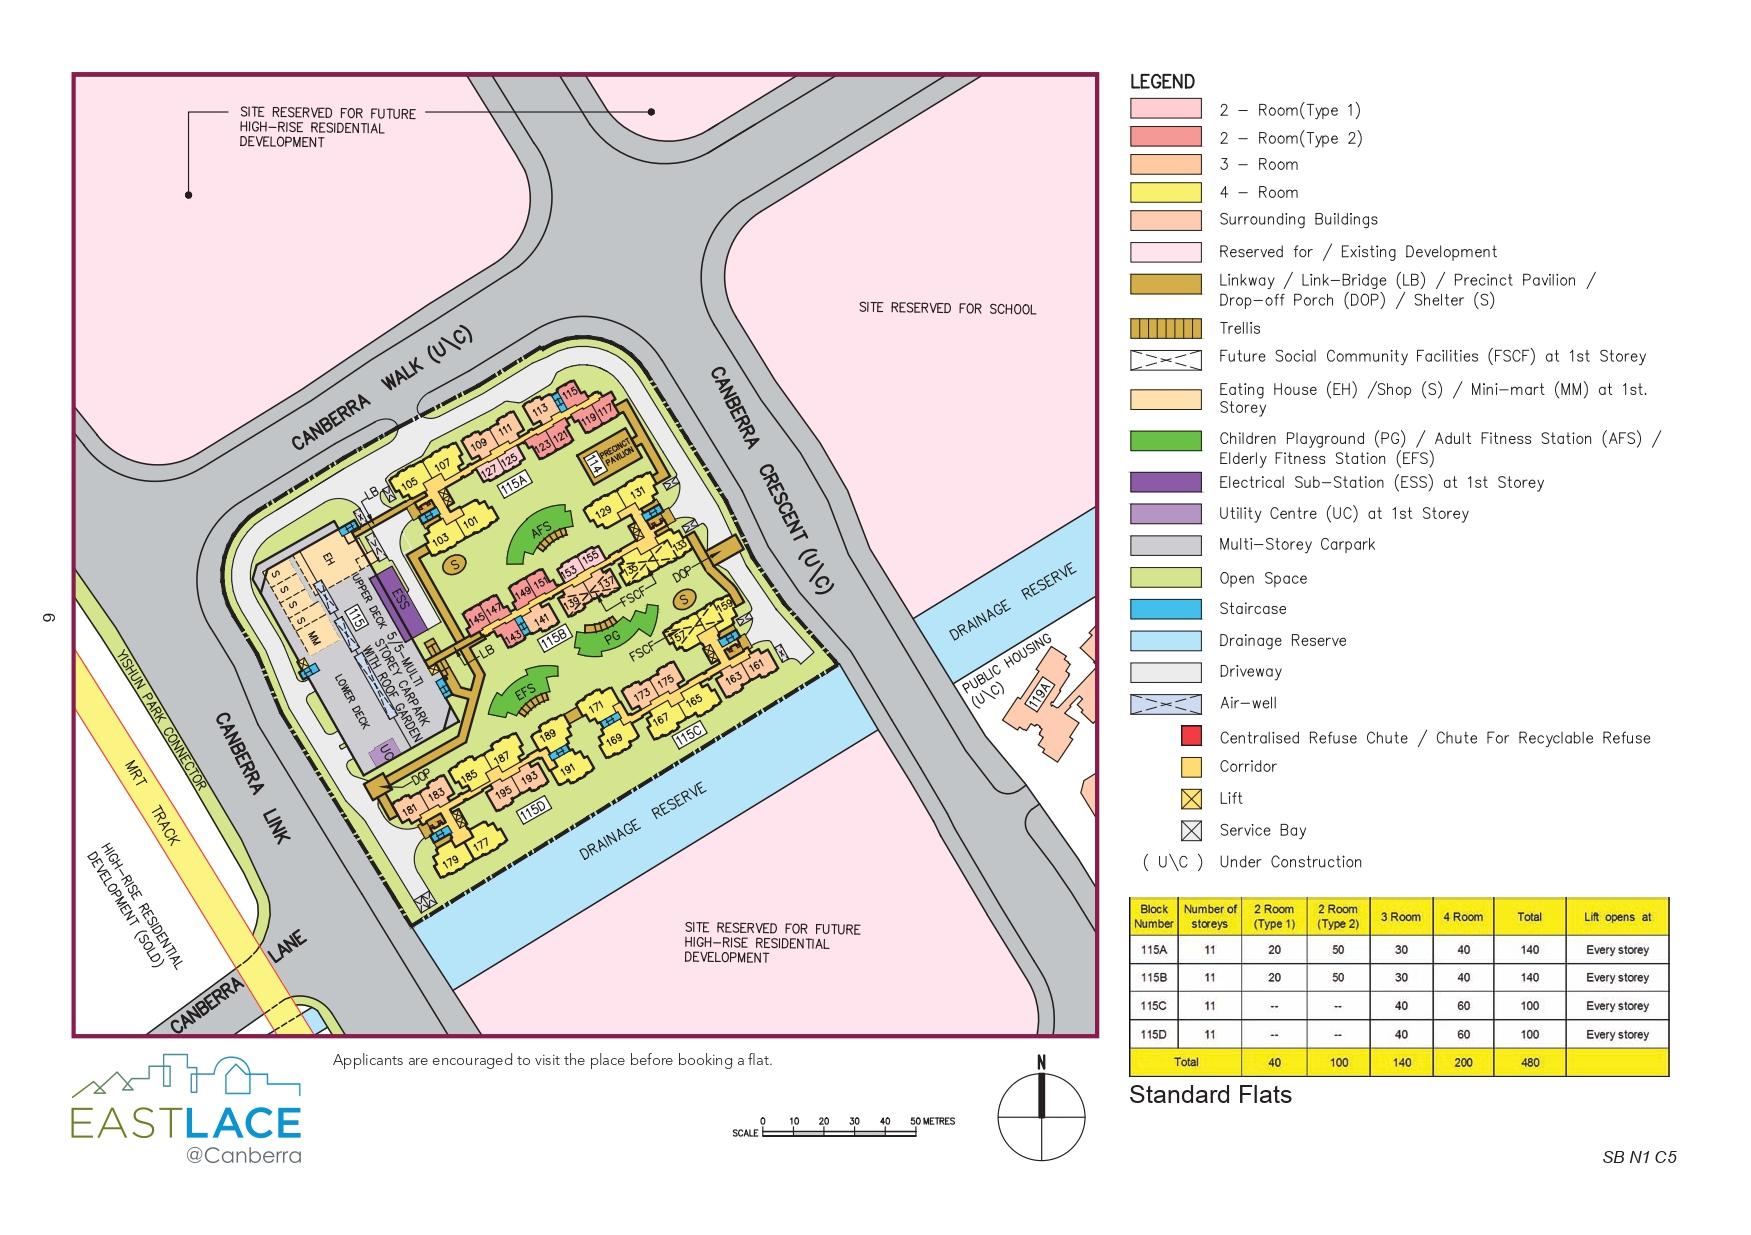 EastLace @ Canberra Site Plan